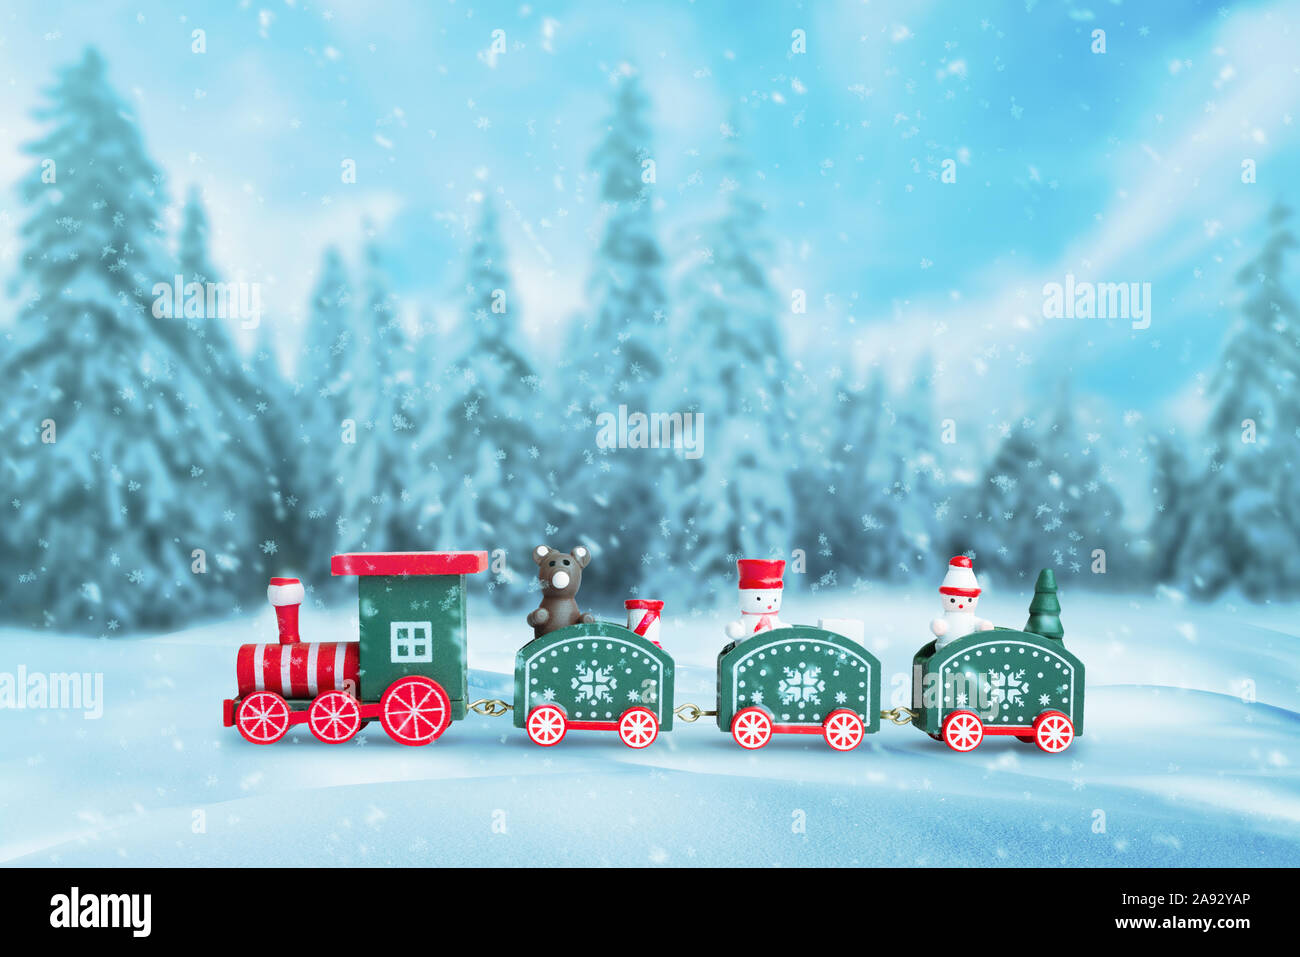 Cute train in the snow. Christmas, New Year background with a lot of snowflakes. Snow trees in background. Stock Photo